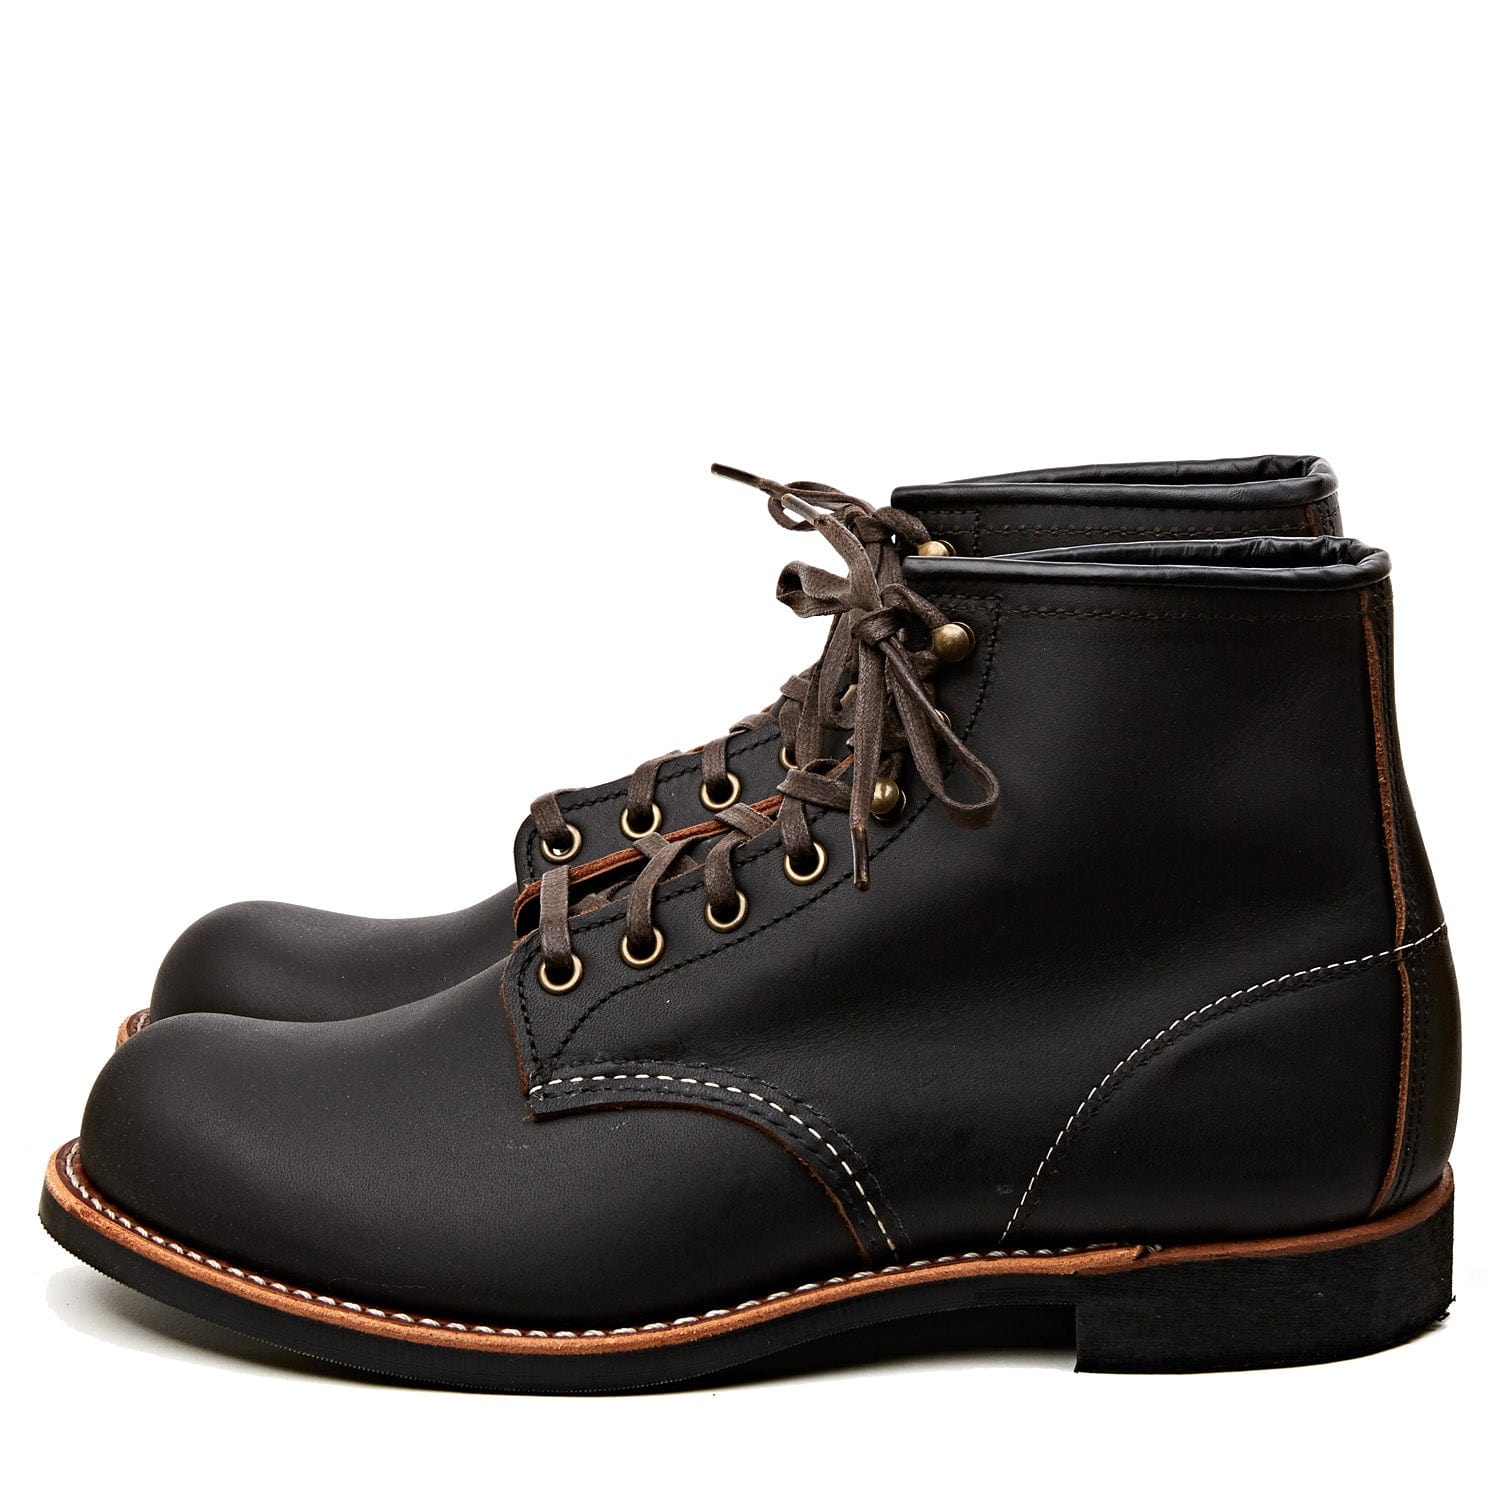 RED WING SHOES Blacksmith Leather Boots for Men